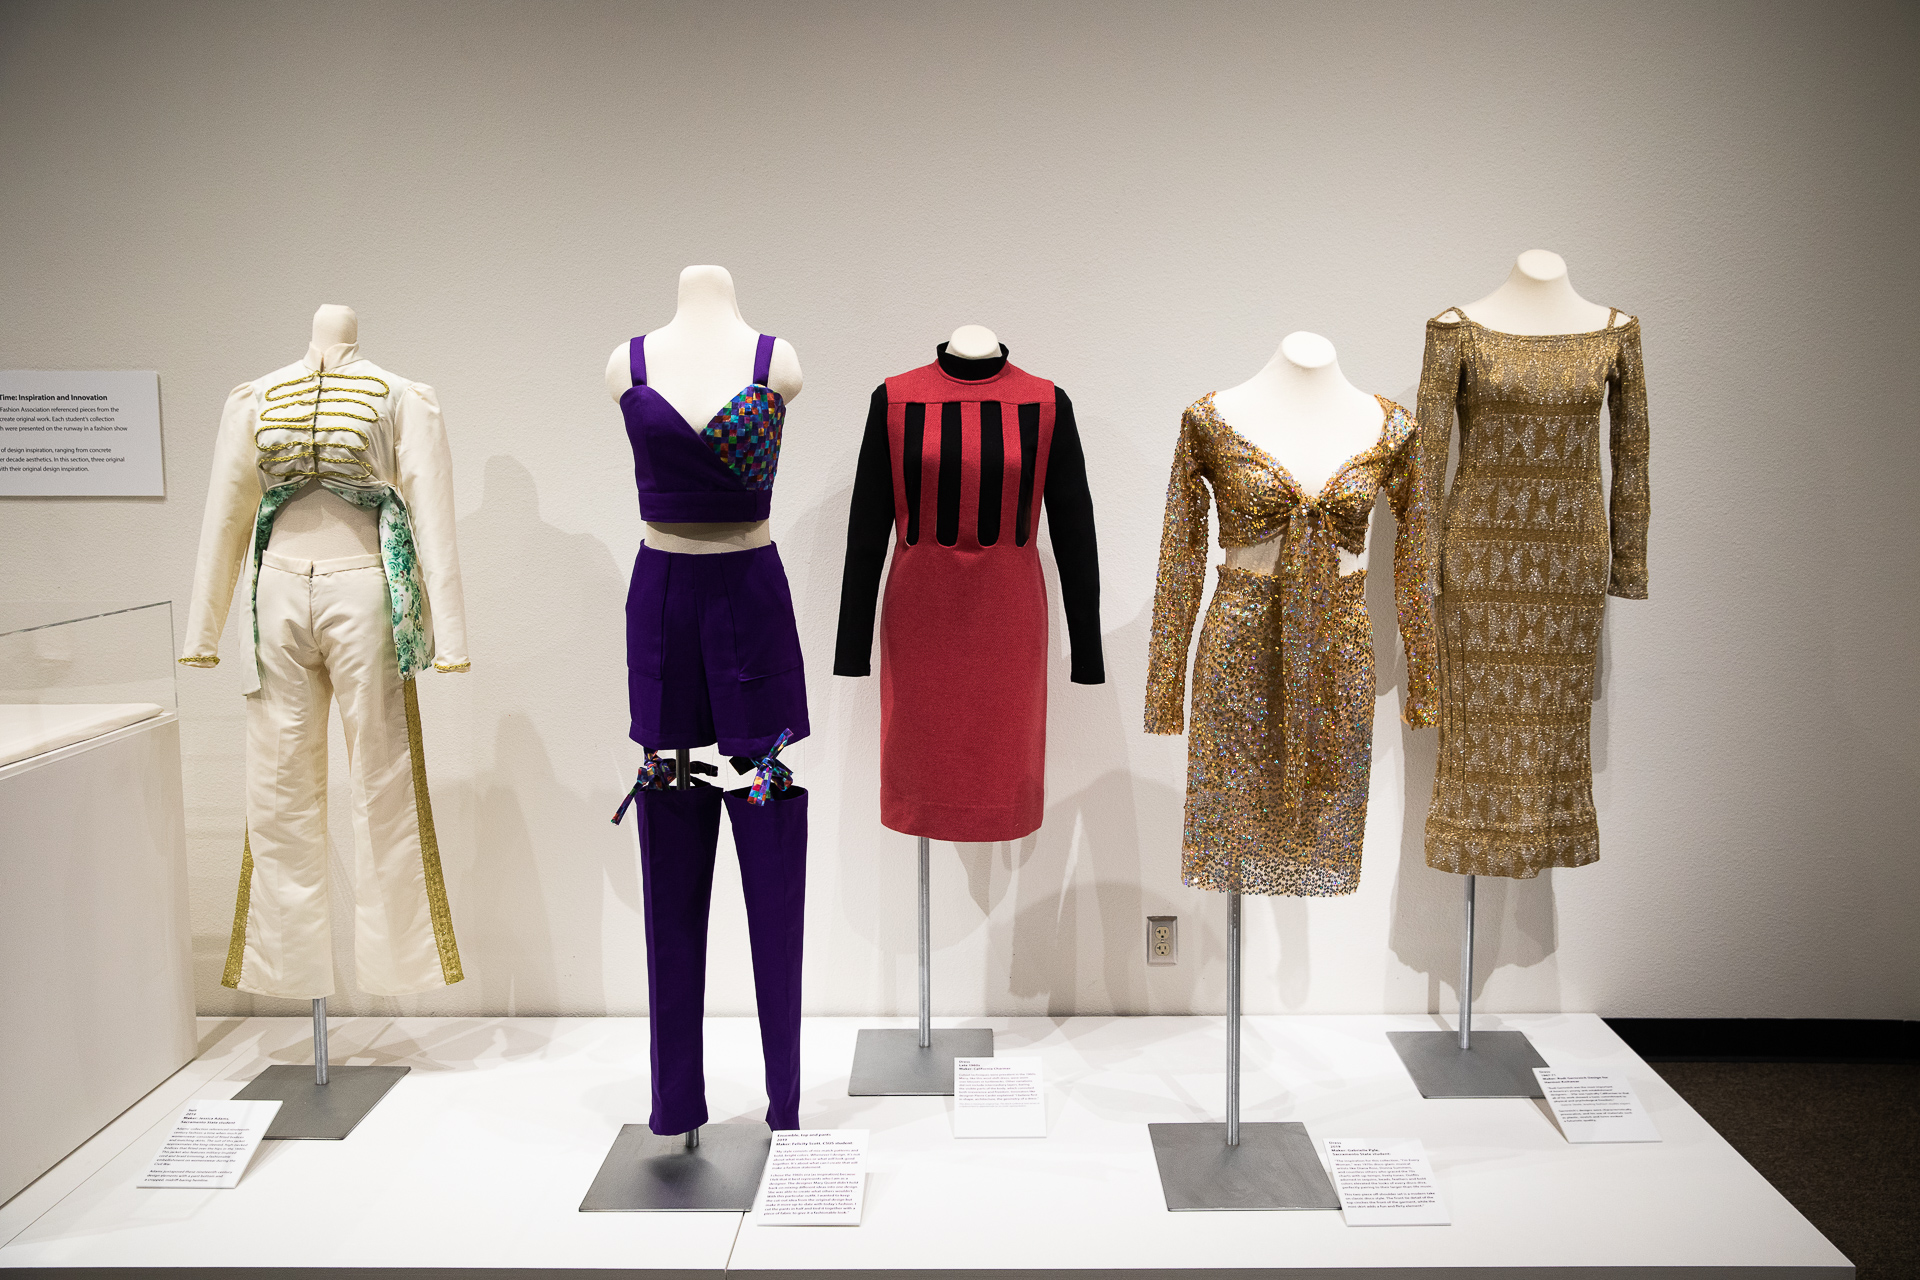 Five costumes from the 1860s to the 1980s are on display as part of Sacramento State University. "Dressing in Sacramento: 120 Years of Fashion" Exhibited in the university library gallery.